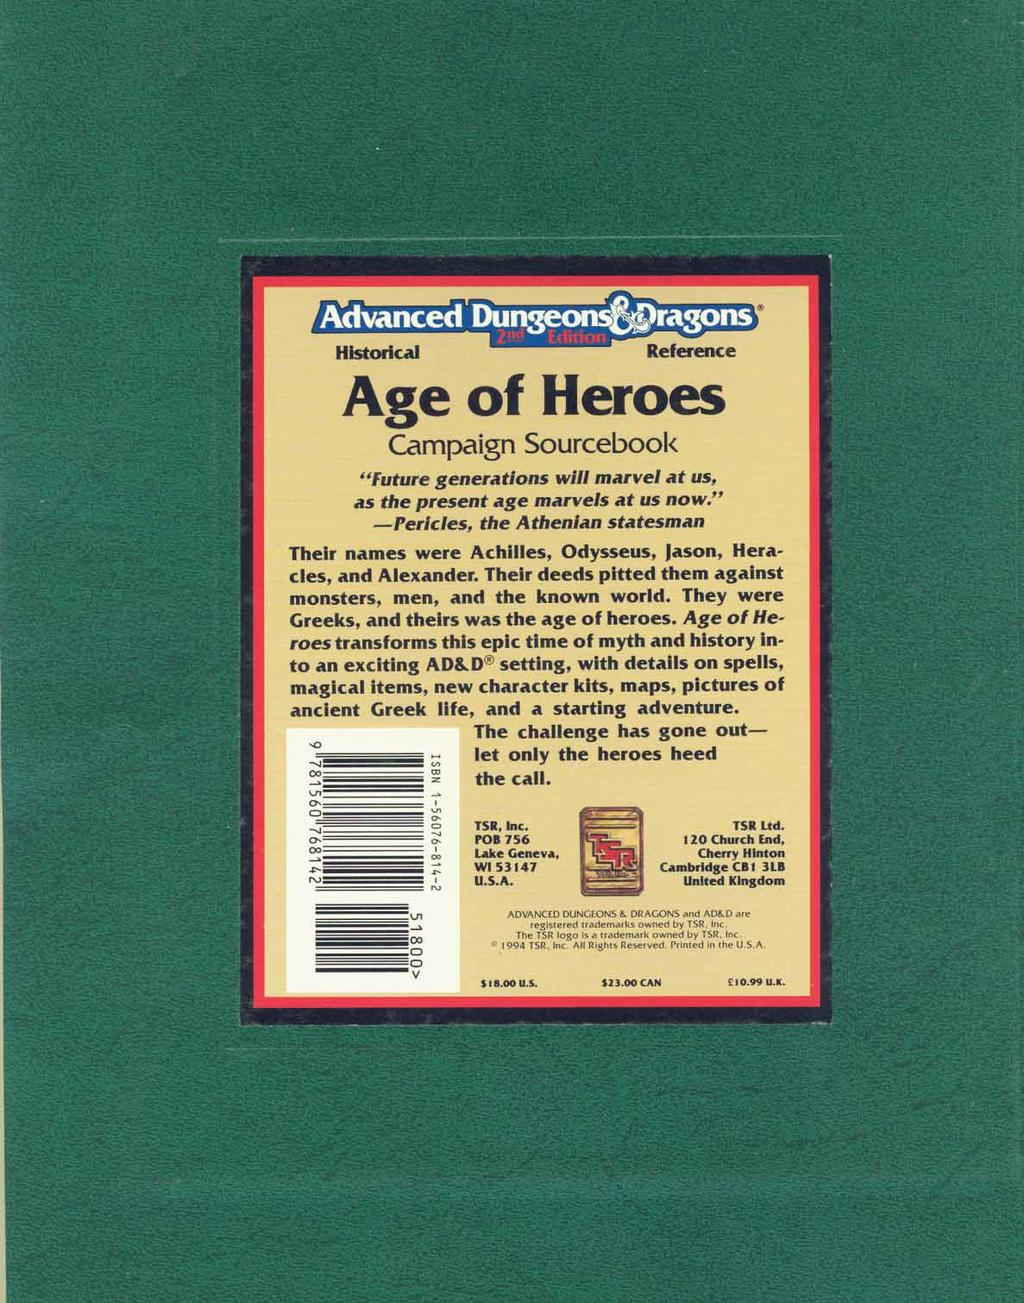 Age of Heroes - Campaign Sourceboolc "Future generations will marvel at us, as the present age marvels at us now.